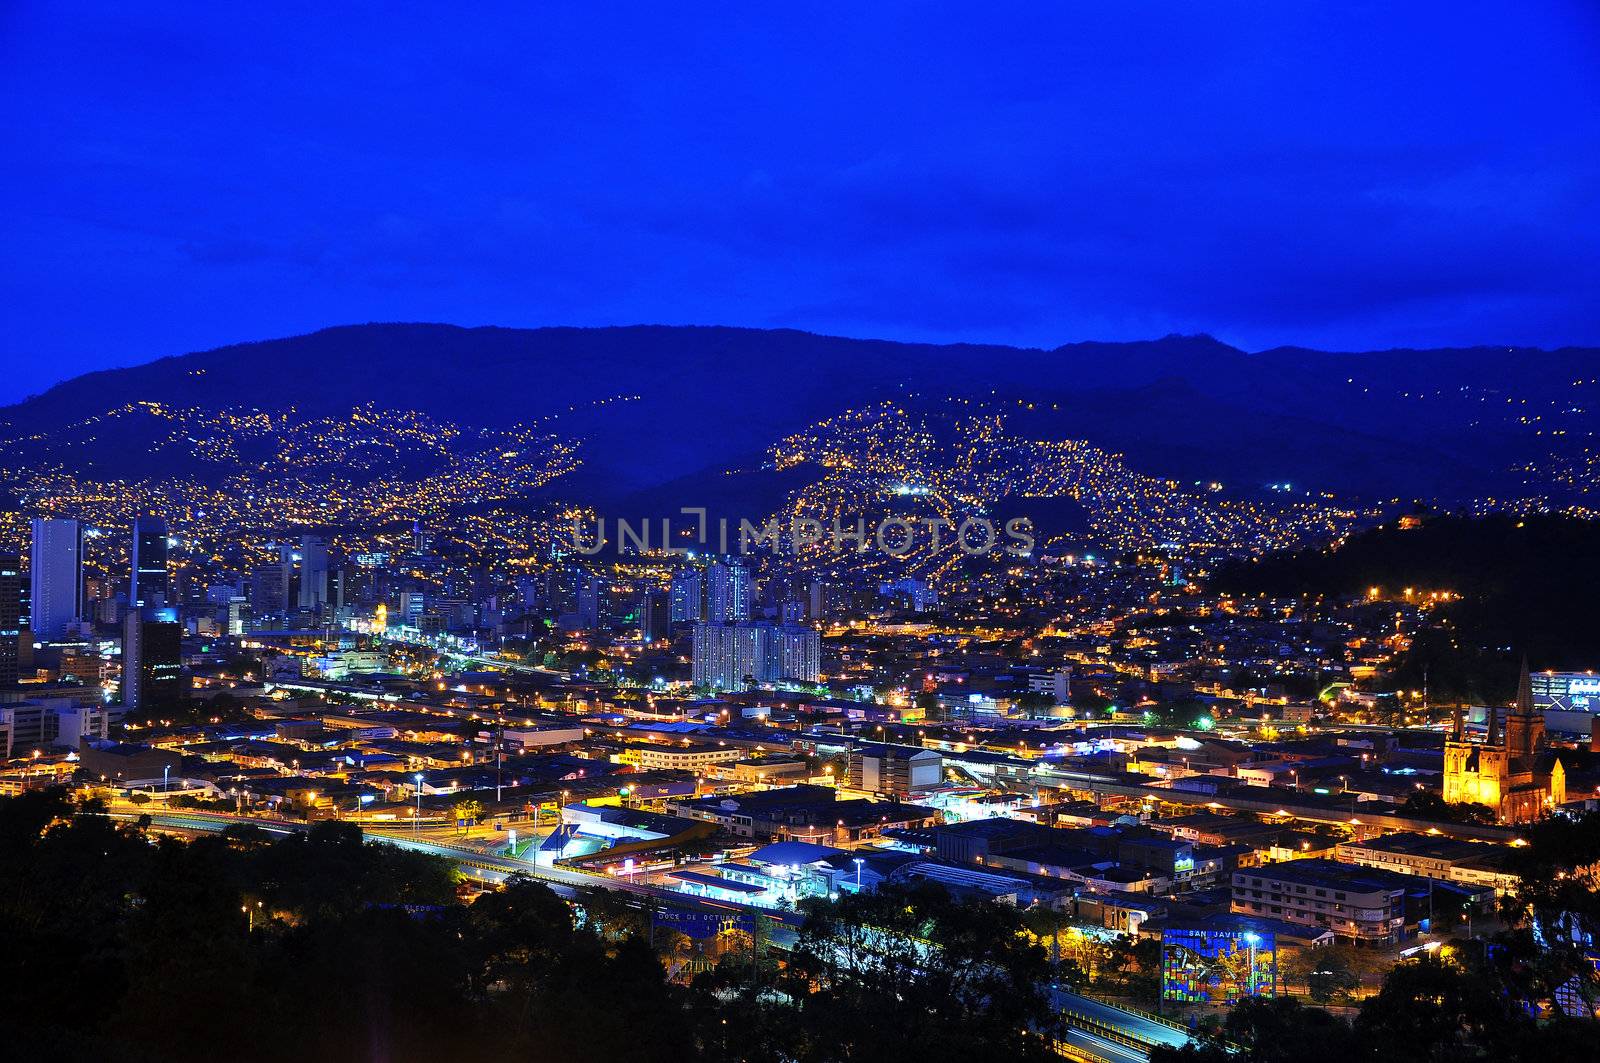 Medellin, Colombia at Night by jkraft5